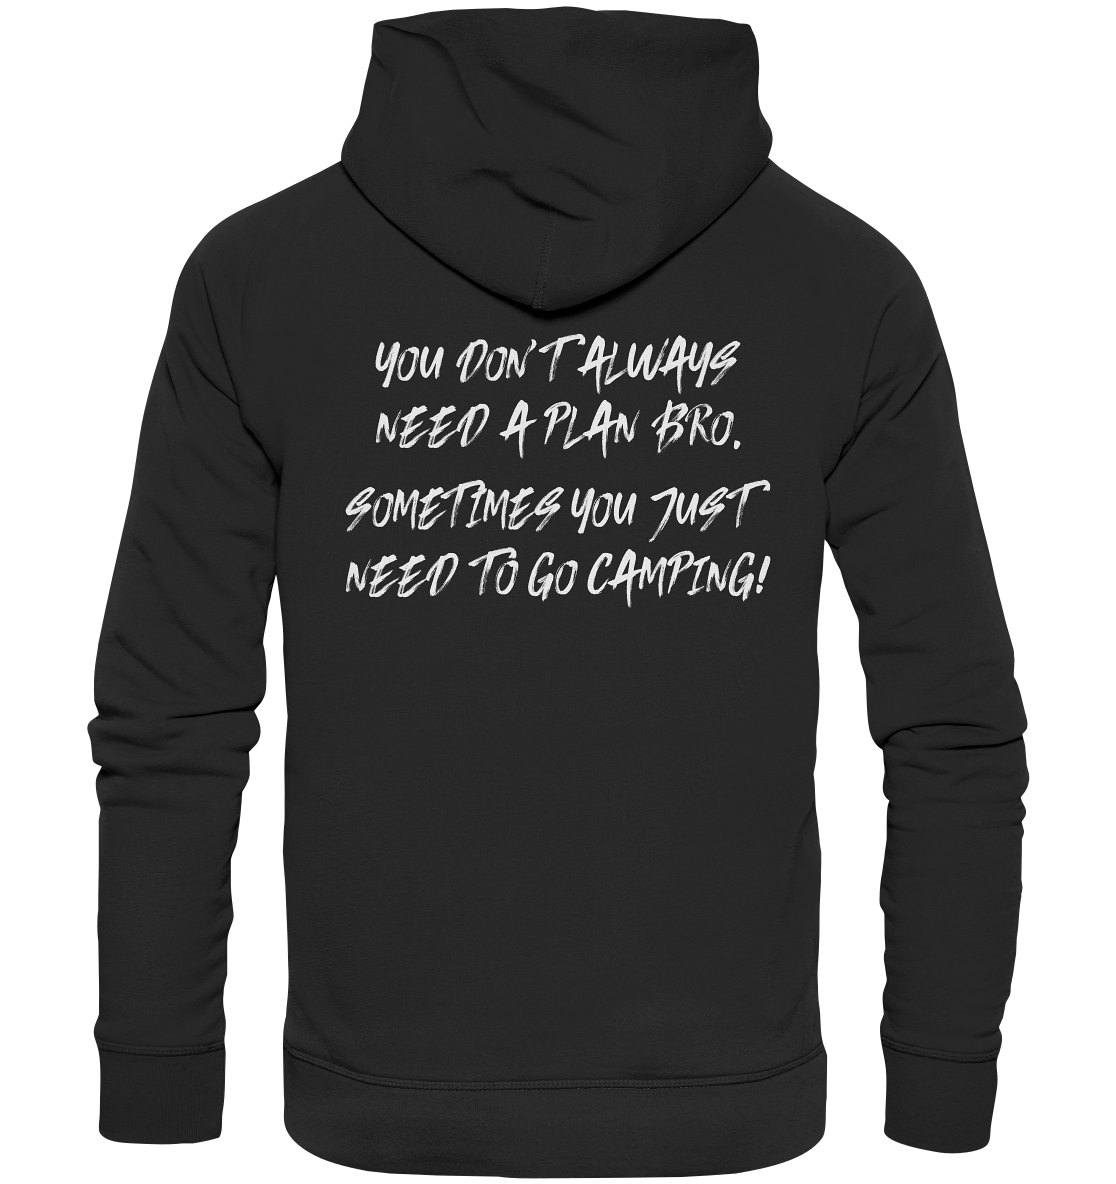 Don't Need A Plan - Just Go Camping | Backprint - Organic Basic Hoodie